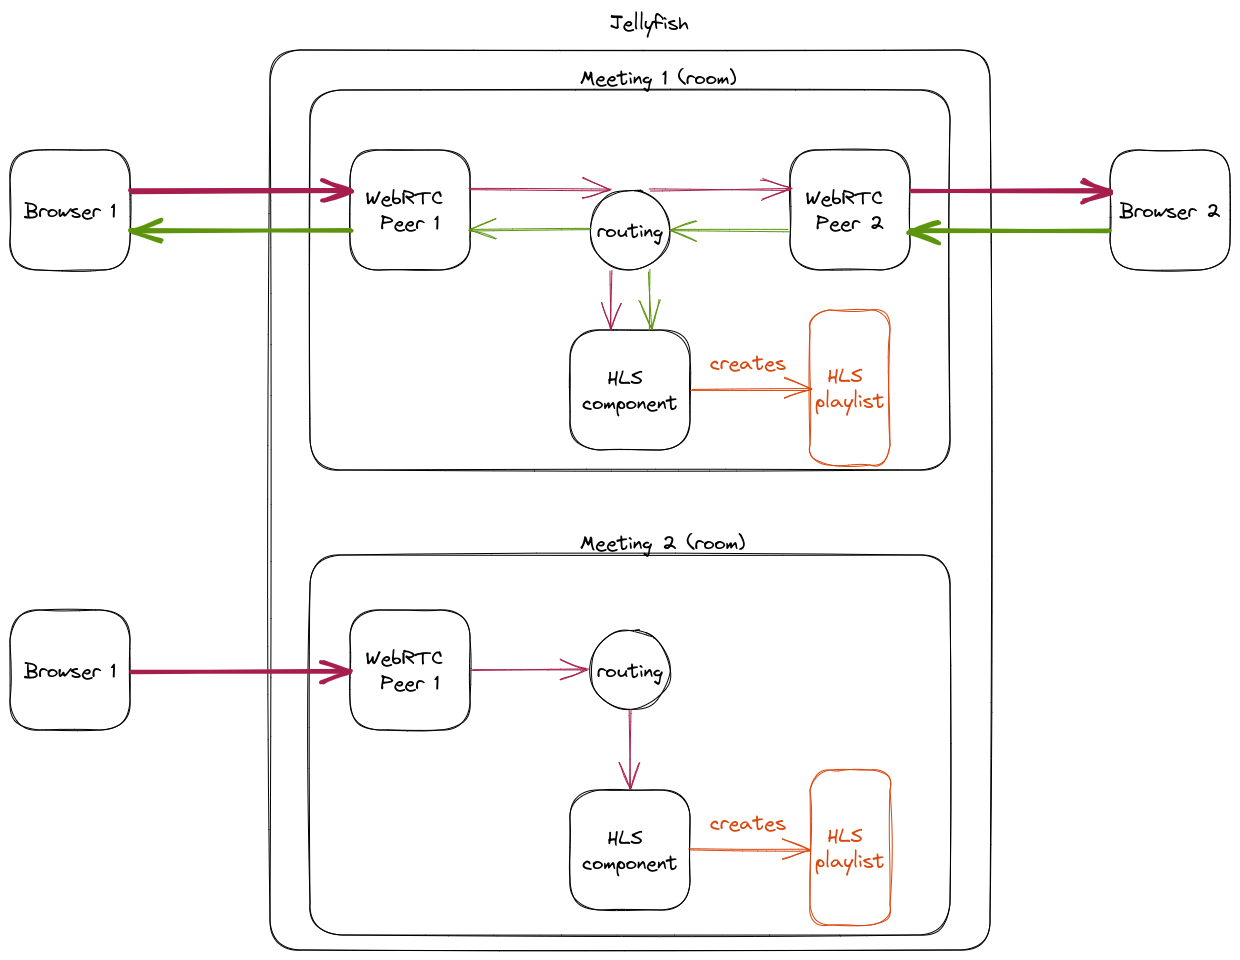 Broadcasting system architecture